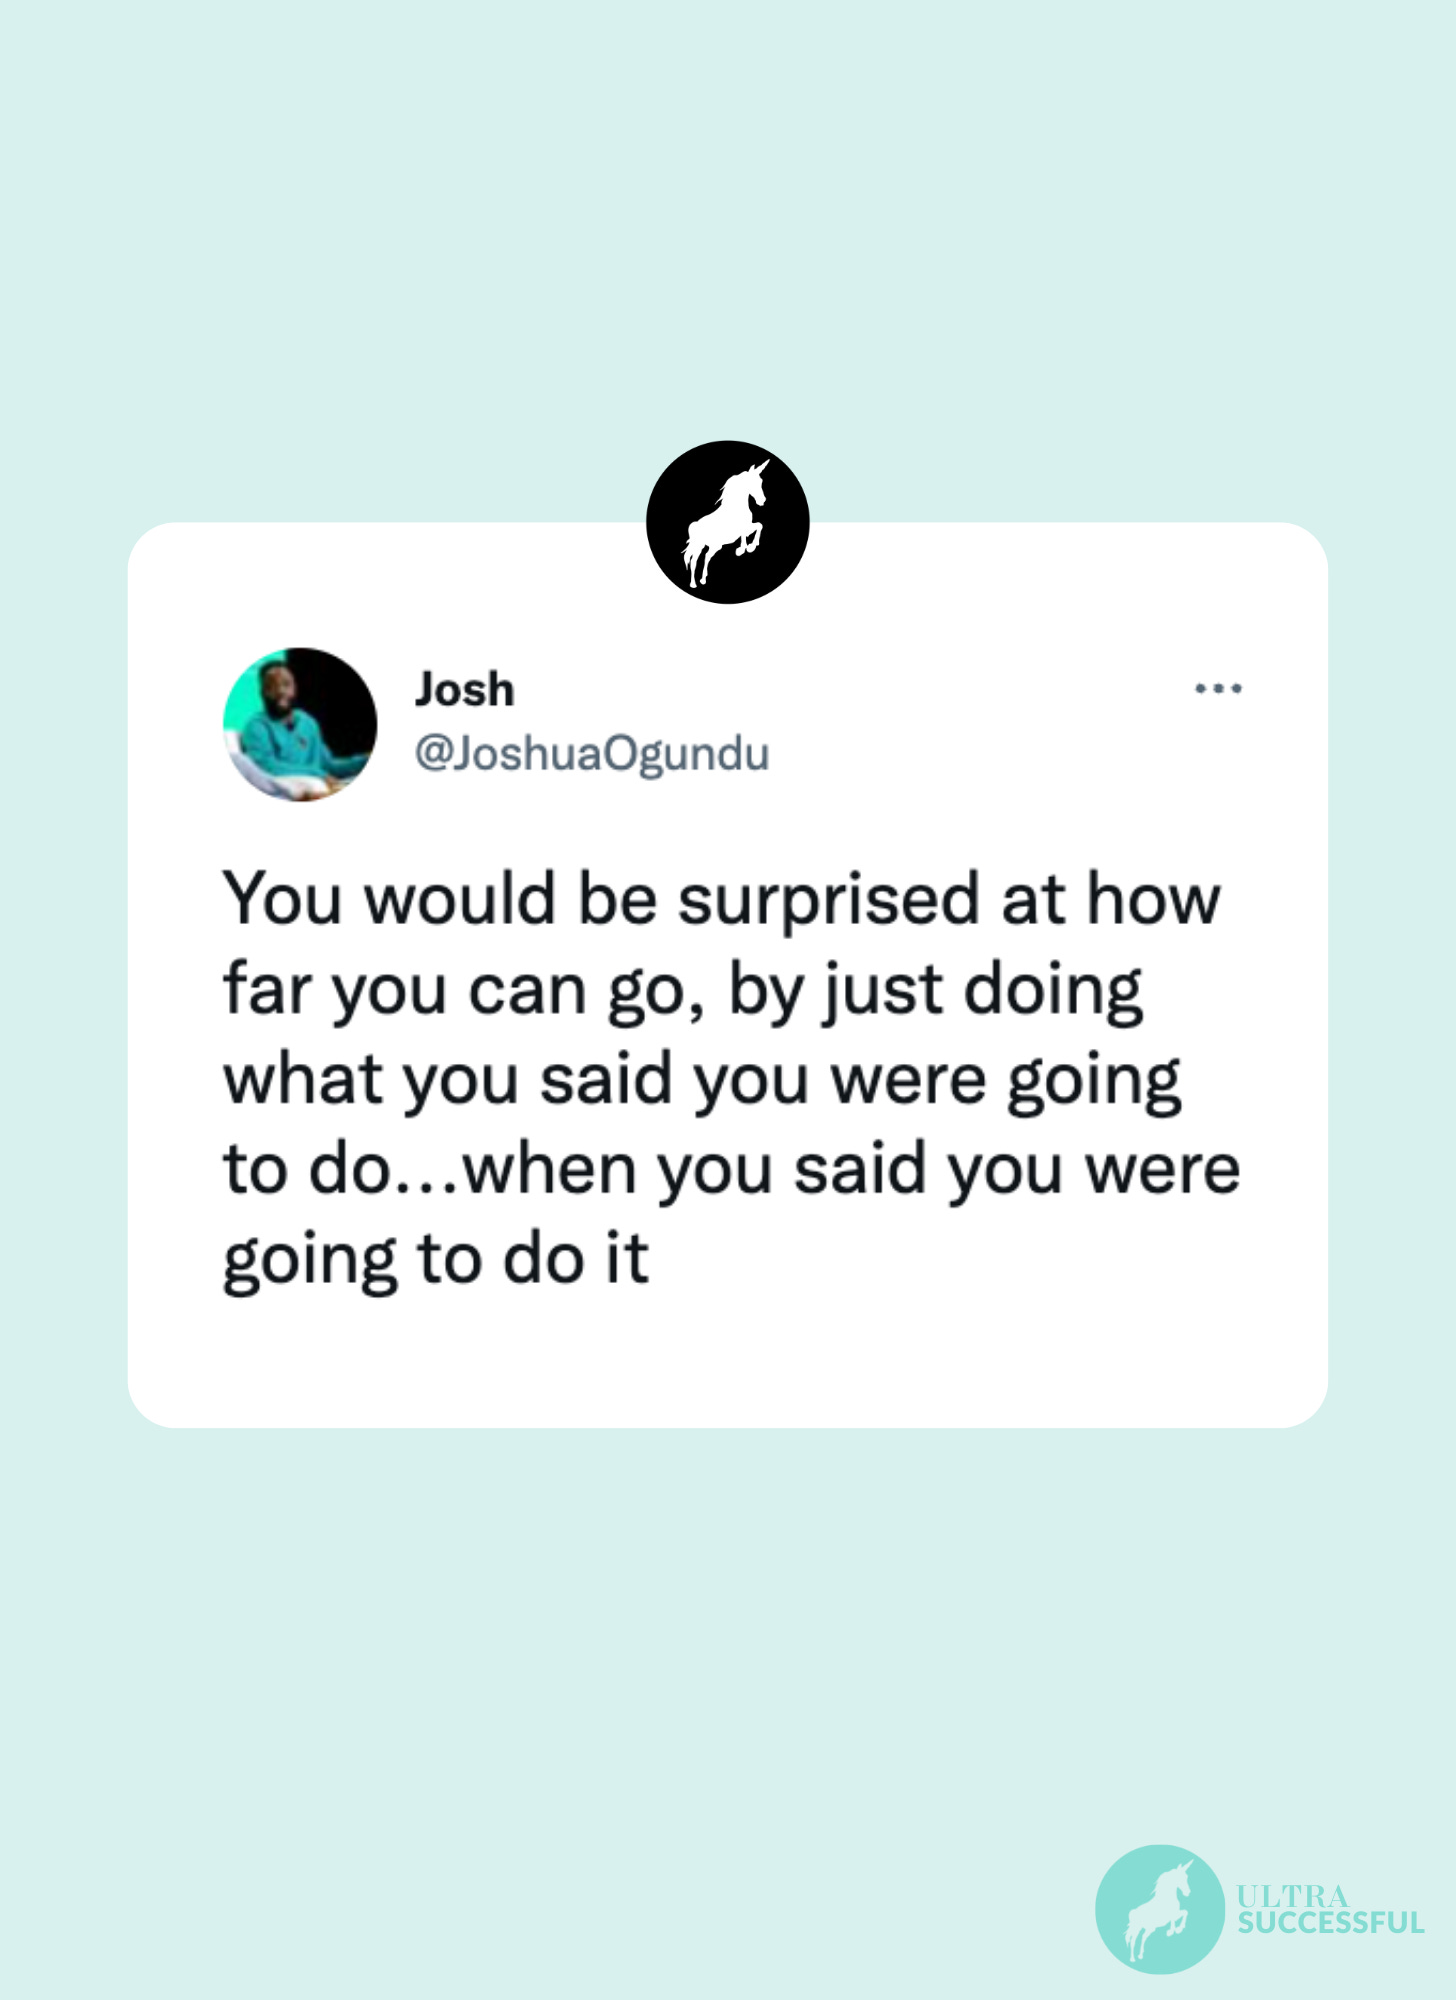 @joshuaogundu: You would be surprised at how far you can go, by just doing what you said you were going to do...when you said you were going to do it